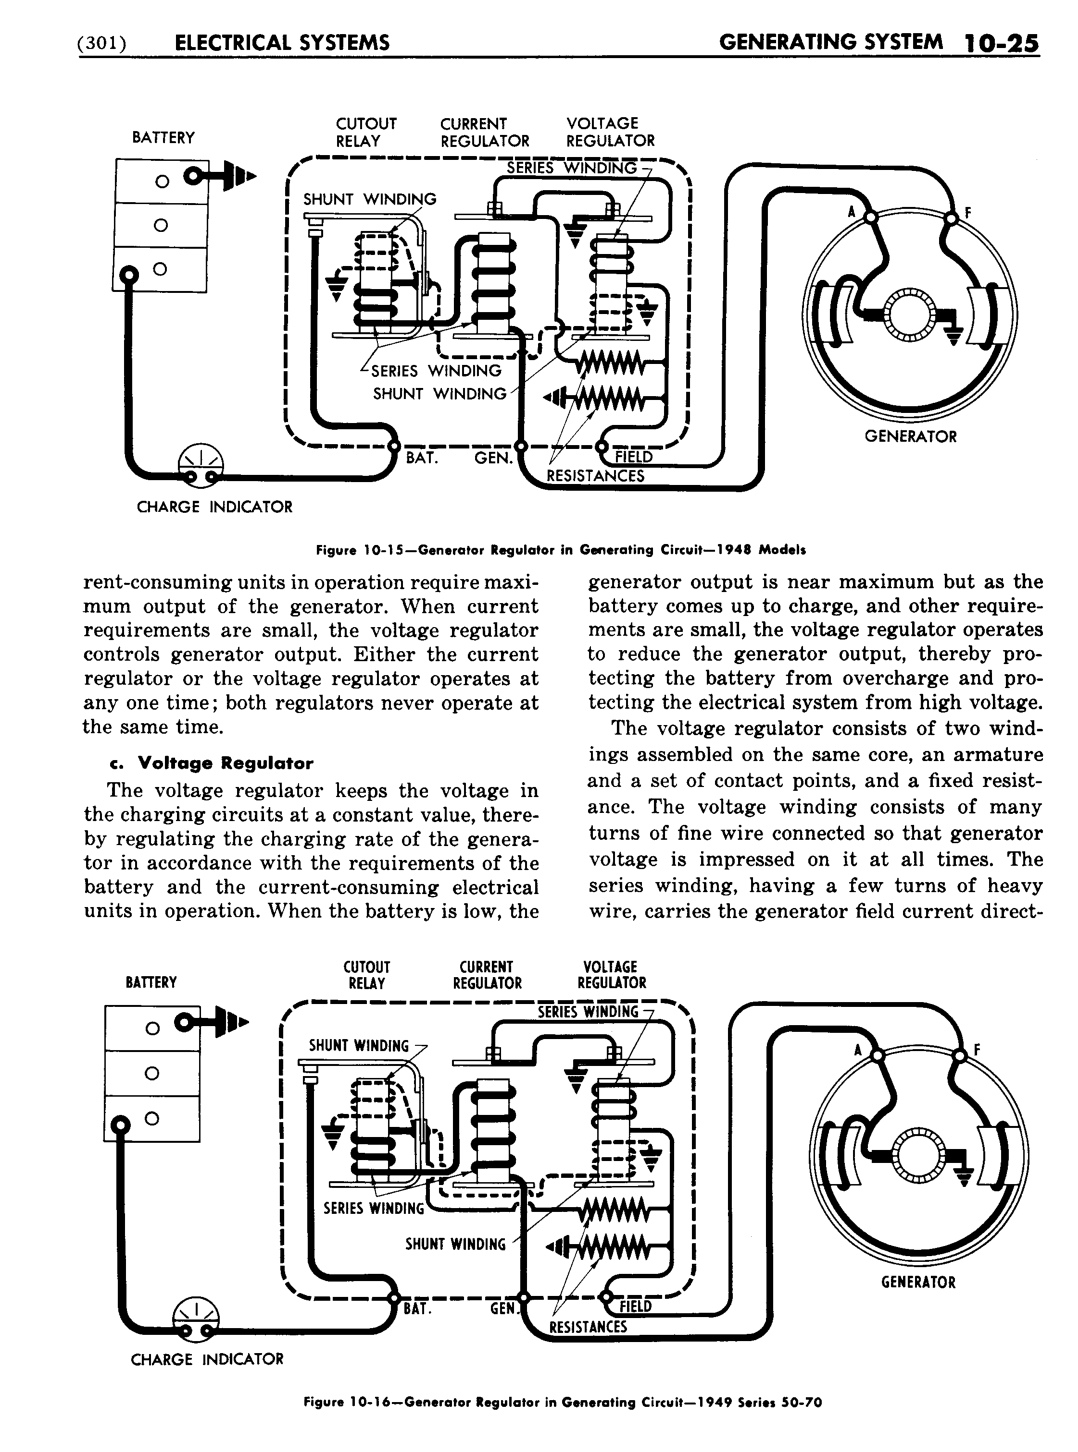 n_11 1948 Buick Shop Manual - Electrical Systems-025-025.jpg